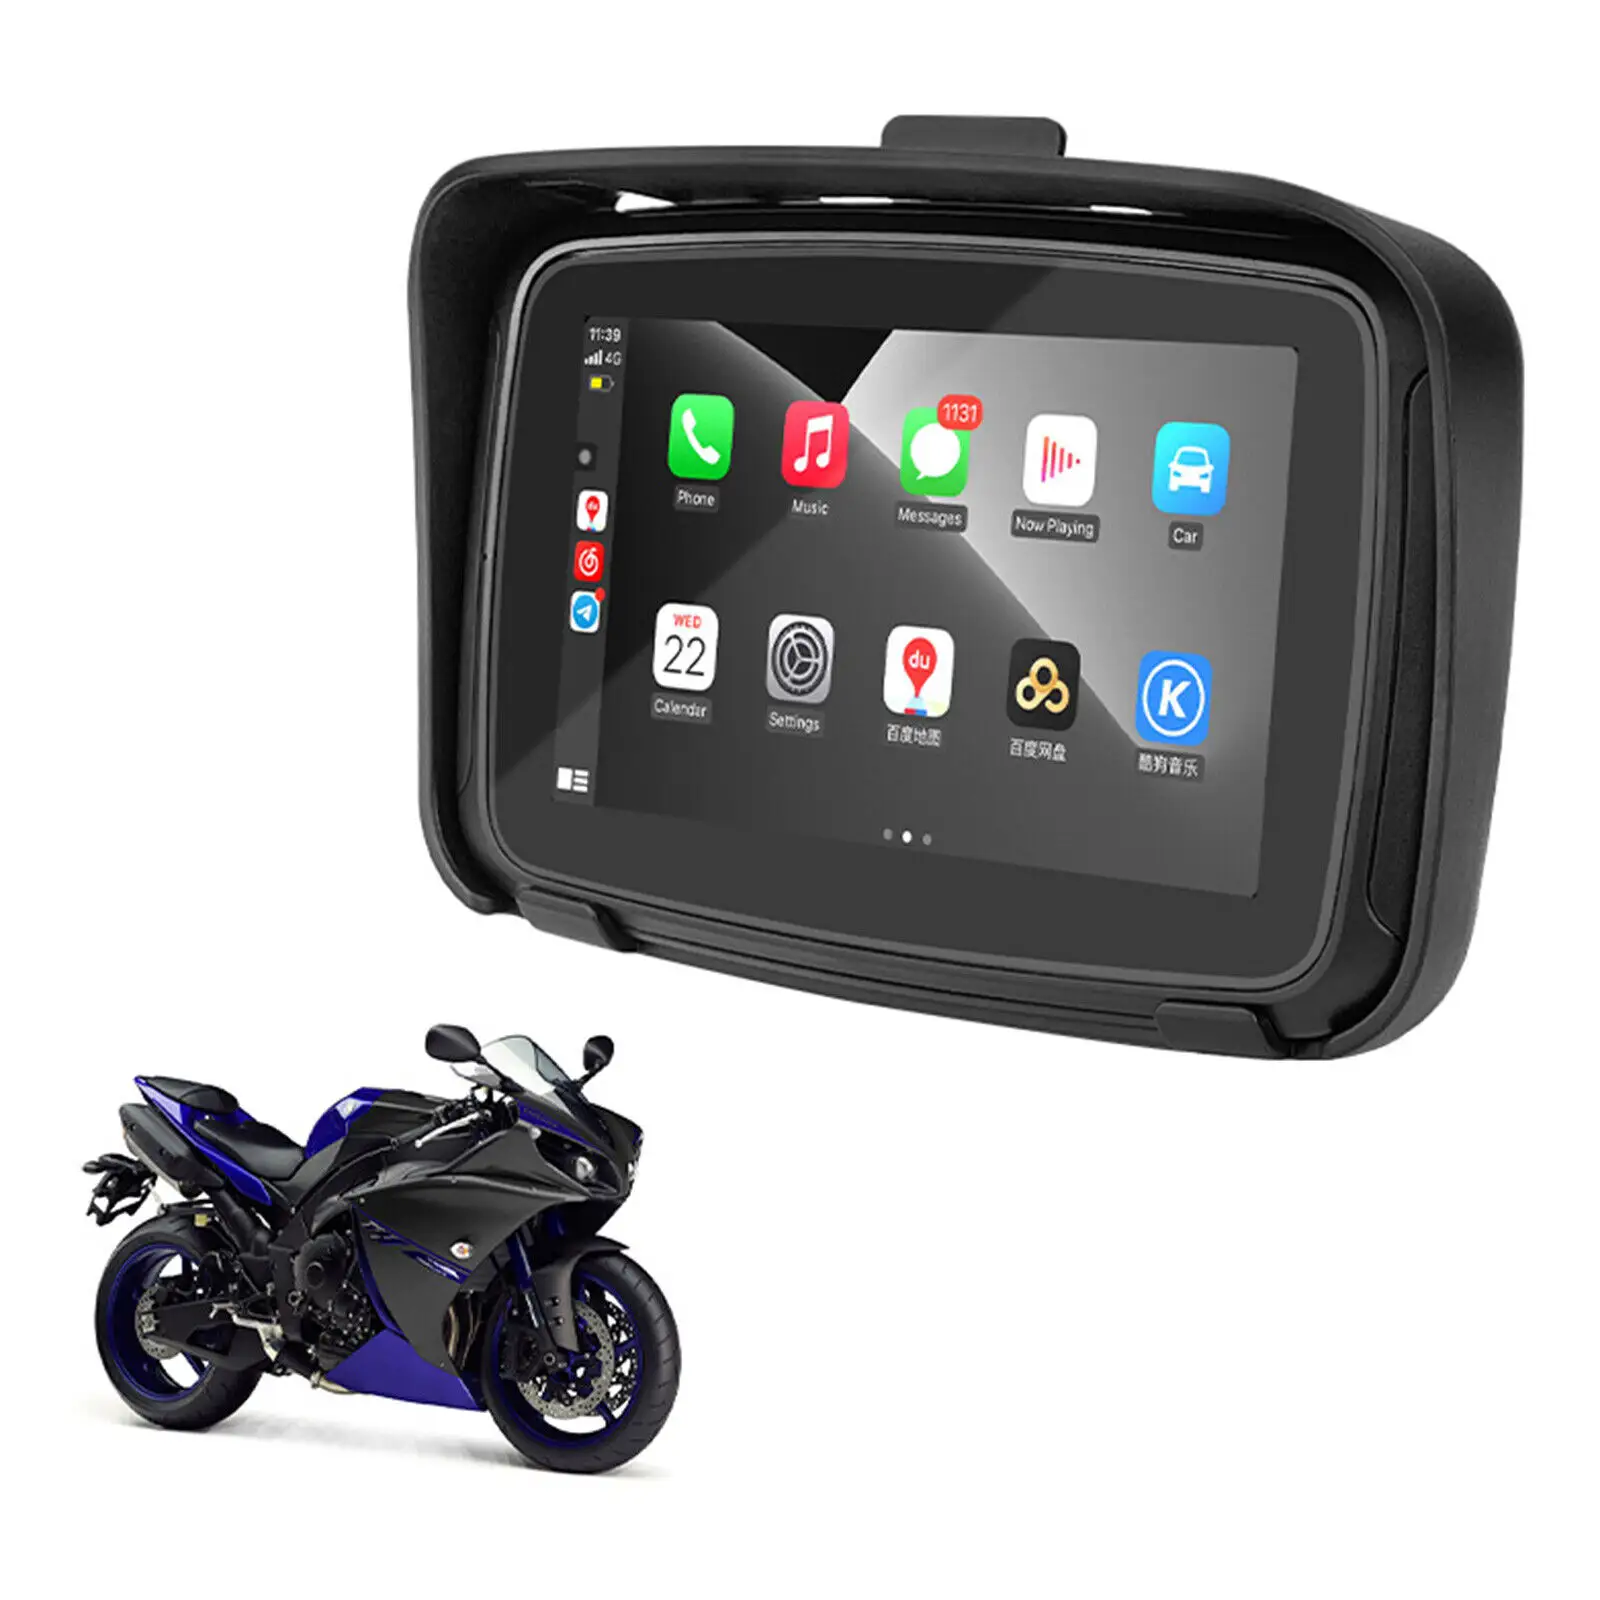 Hot sale motorcycle gps navigator 5.5" Bluetooth Hands-Free motorcycle android gps tracking device